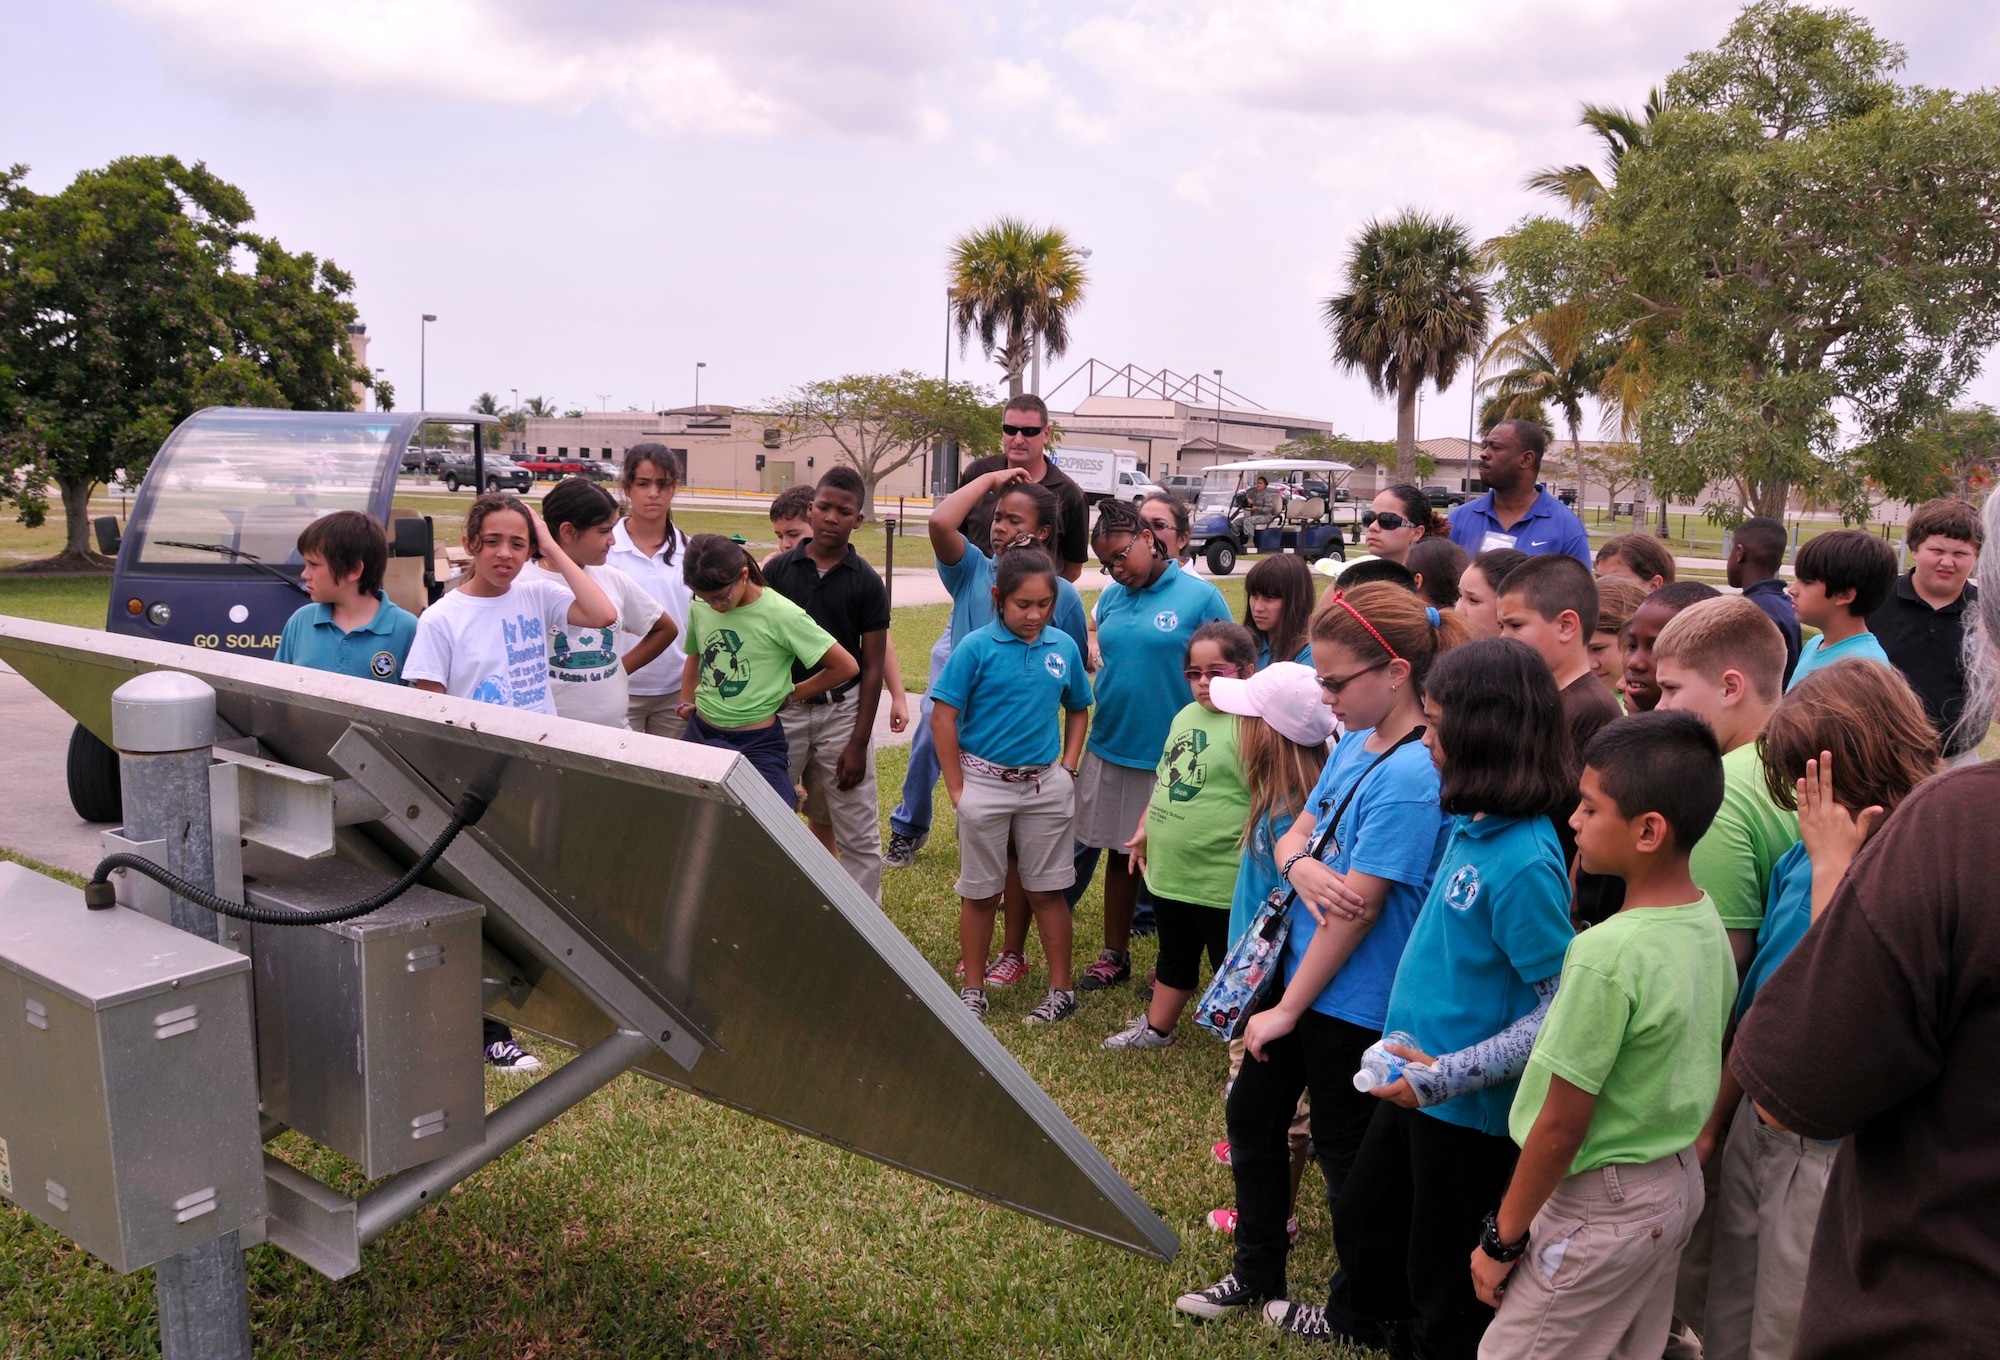 Students from Homestead, Fla.’s Air Base Elementary Green Team gather around a solar panel while Mr. Tim Driscoll, Homestead Air Reserve Base environmental protection specialist, demonstrates how the base utilizes solar power to students during an environmental tour at Homestead Air Reserve Base, Fla., May 13. The environmental tour was conducted as an educational experience for the Green Team in conjunction with Earth Day. The team includes more than 25 children, from grades three through five, who are part of the environmentally focused school club. (U.S. Air Force photo/Senior Airman Nicholas Caceres)